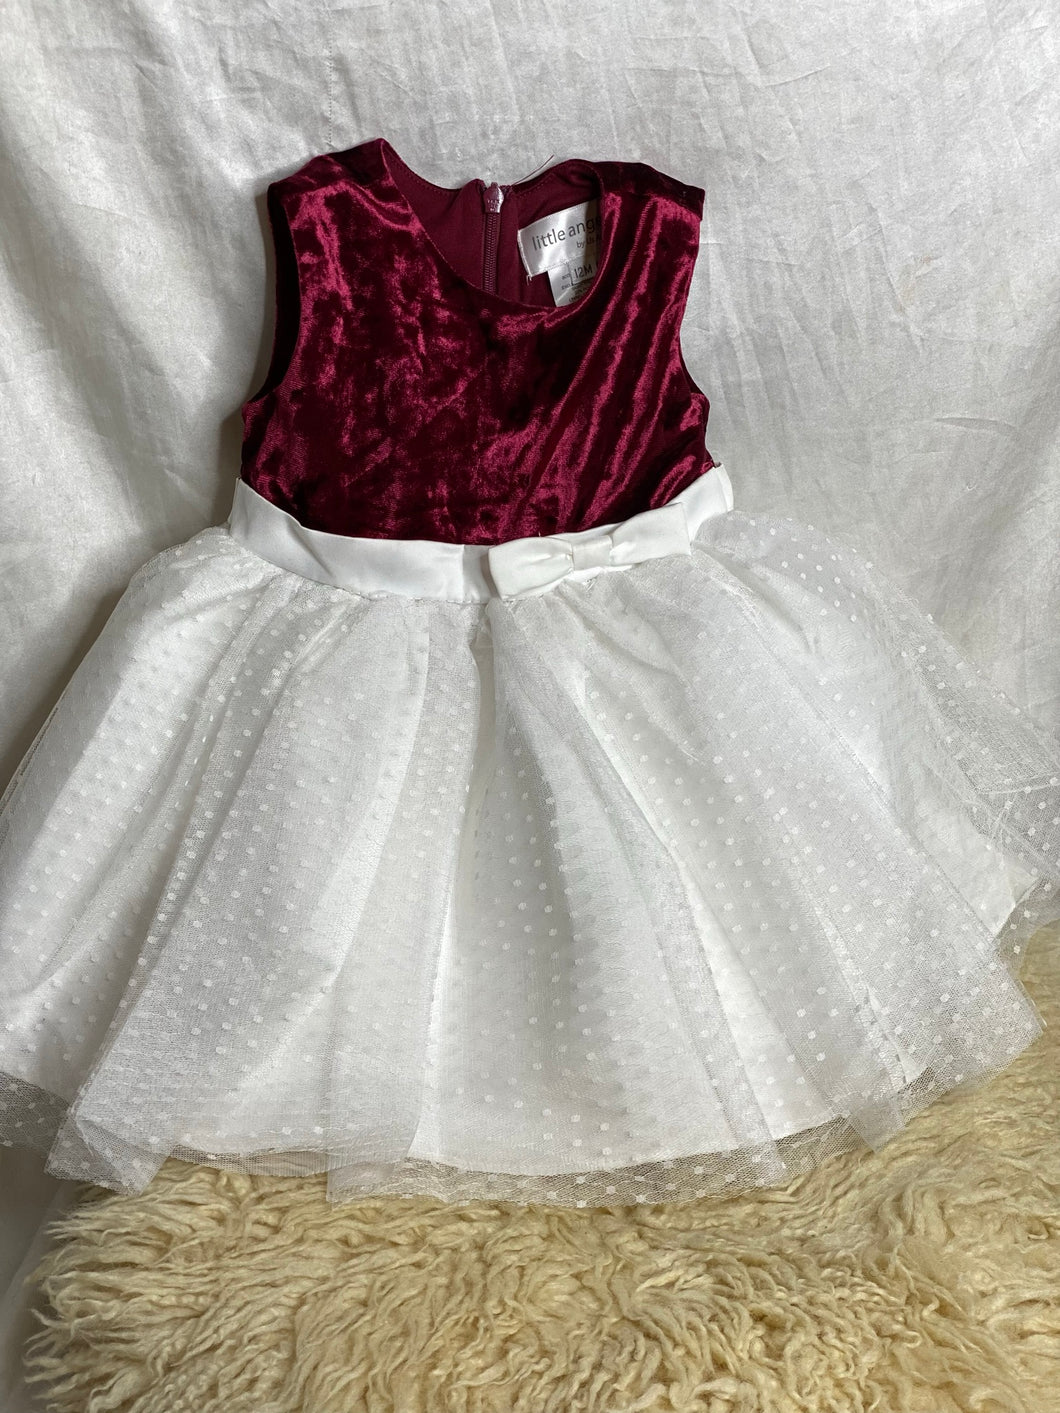 Macy's beautiful Deep Red Velvet and White Exquisite Tulle Dress Girl's 12 months